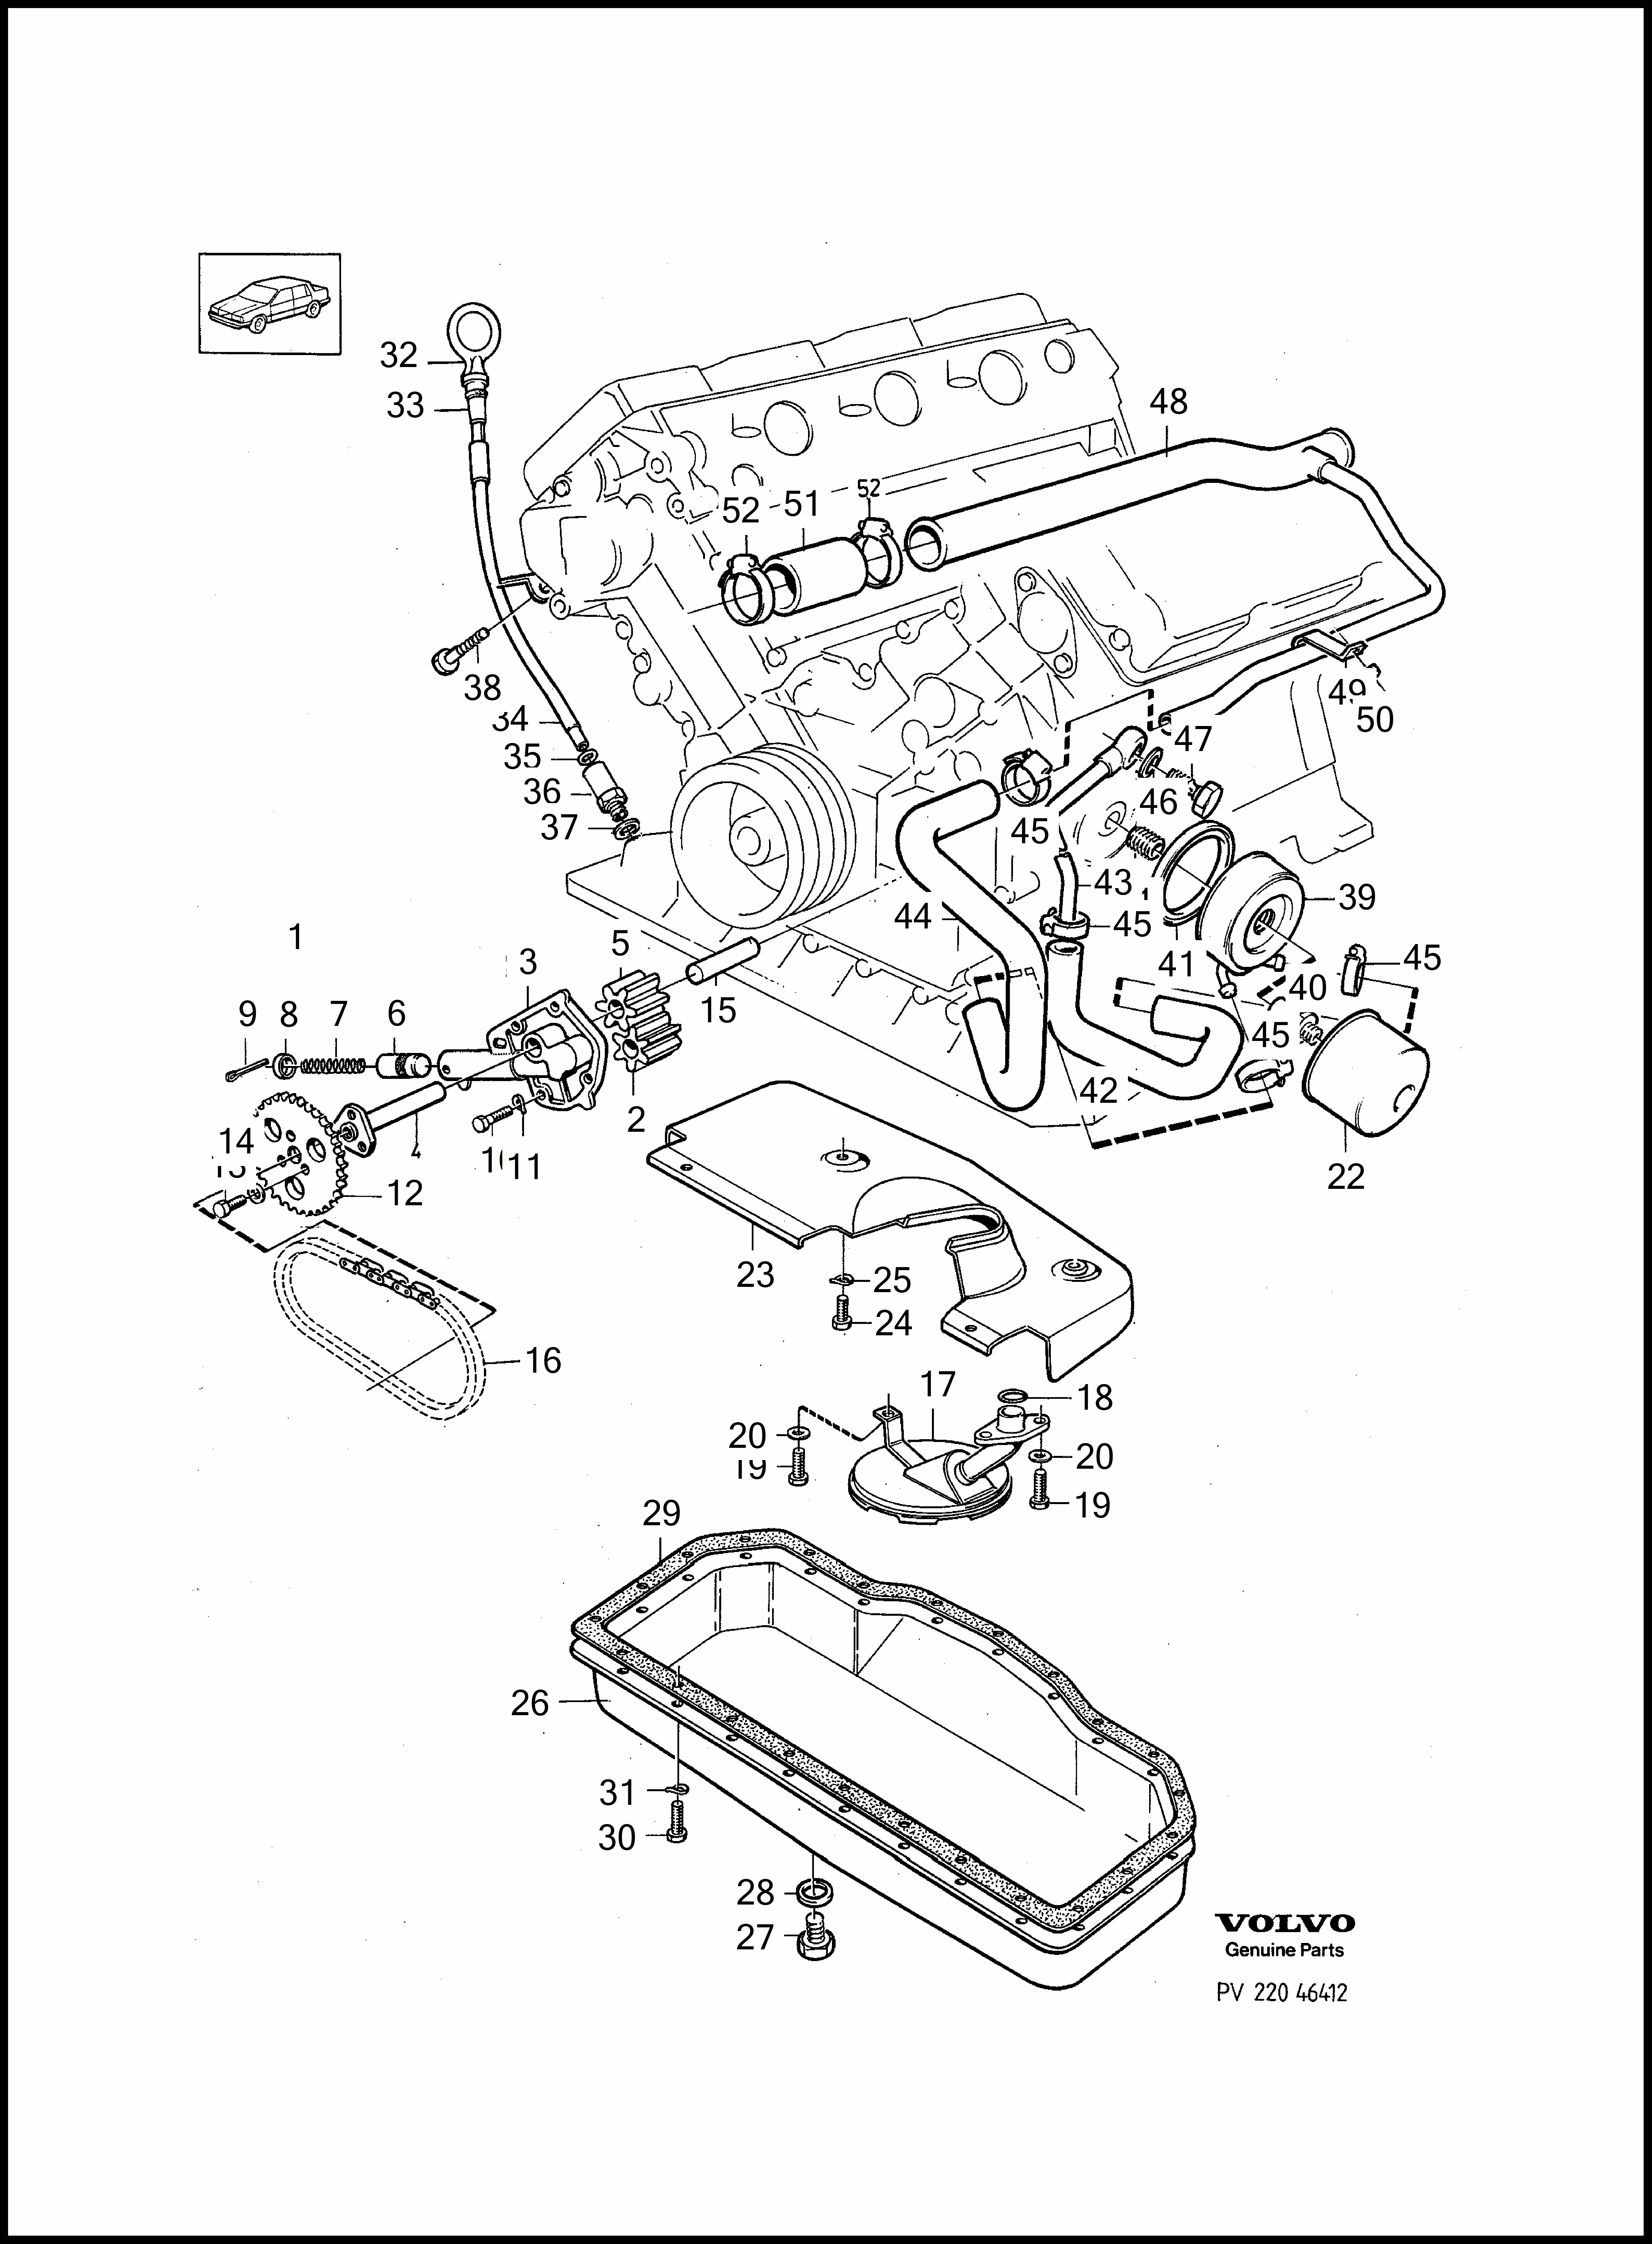 Lubricating system for Volvo 960 960